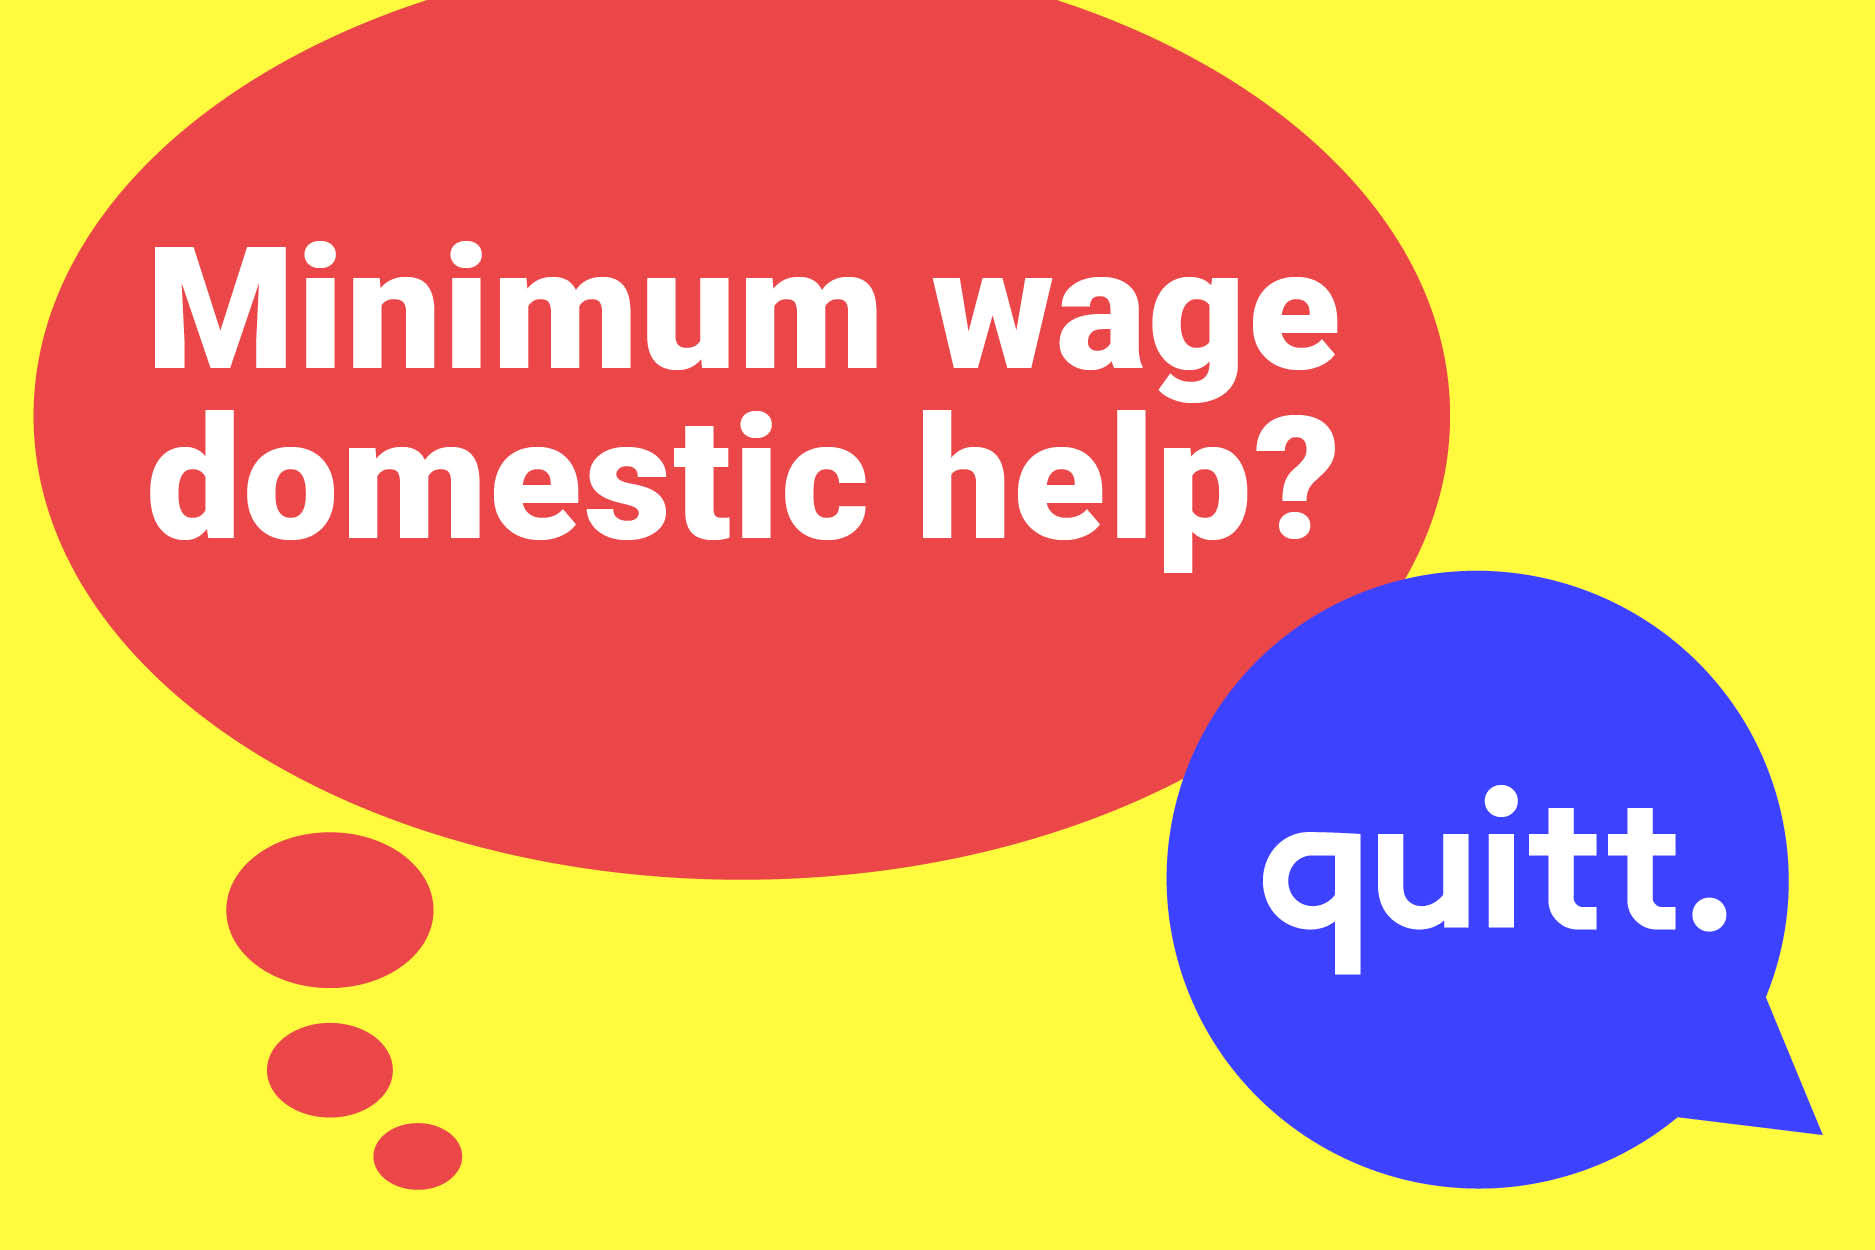 Is there a minimum wage for my domestic help that I must consider?